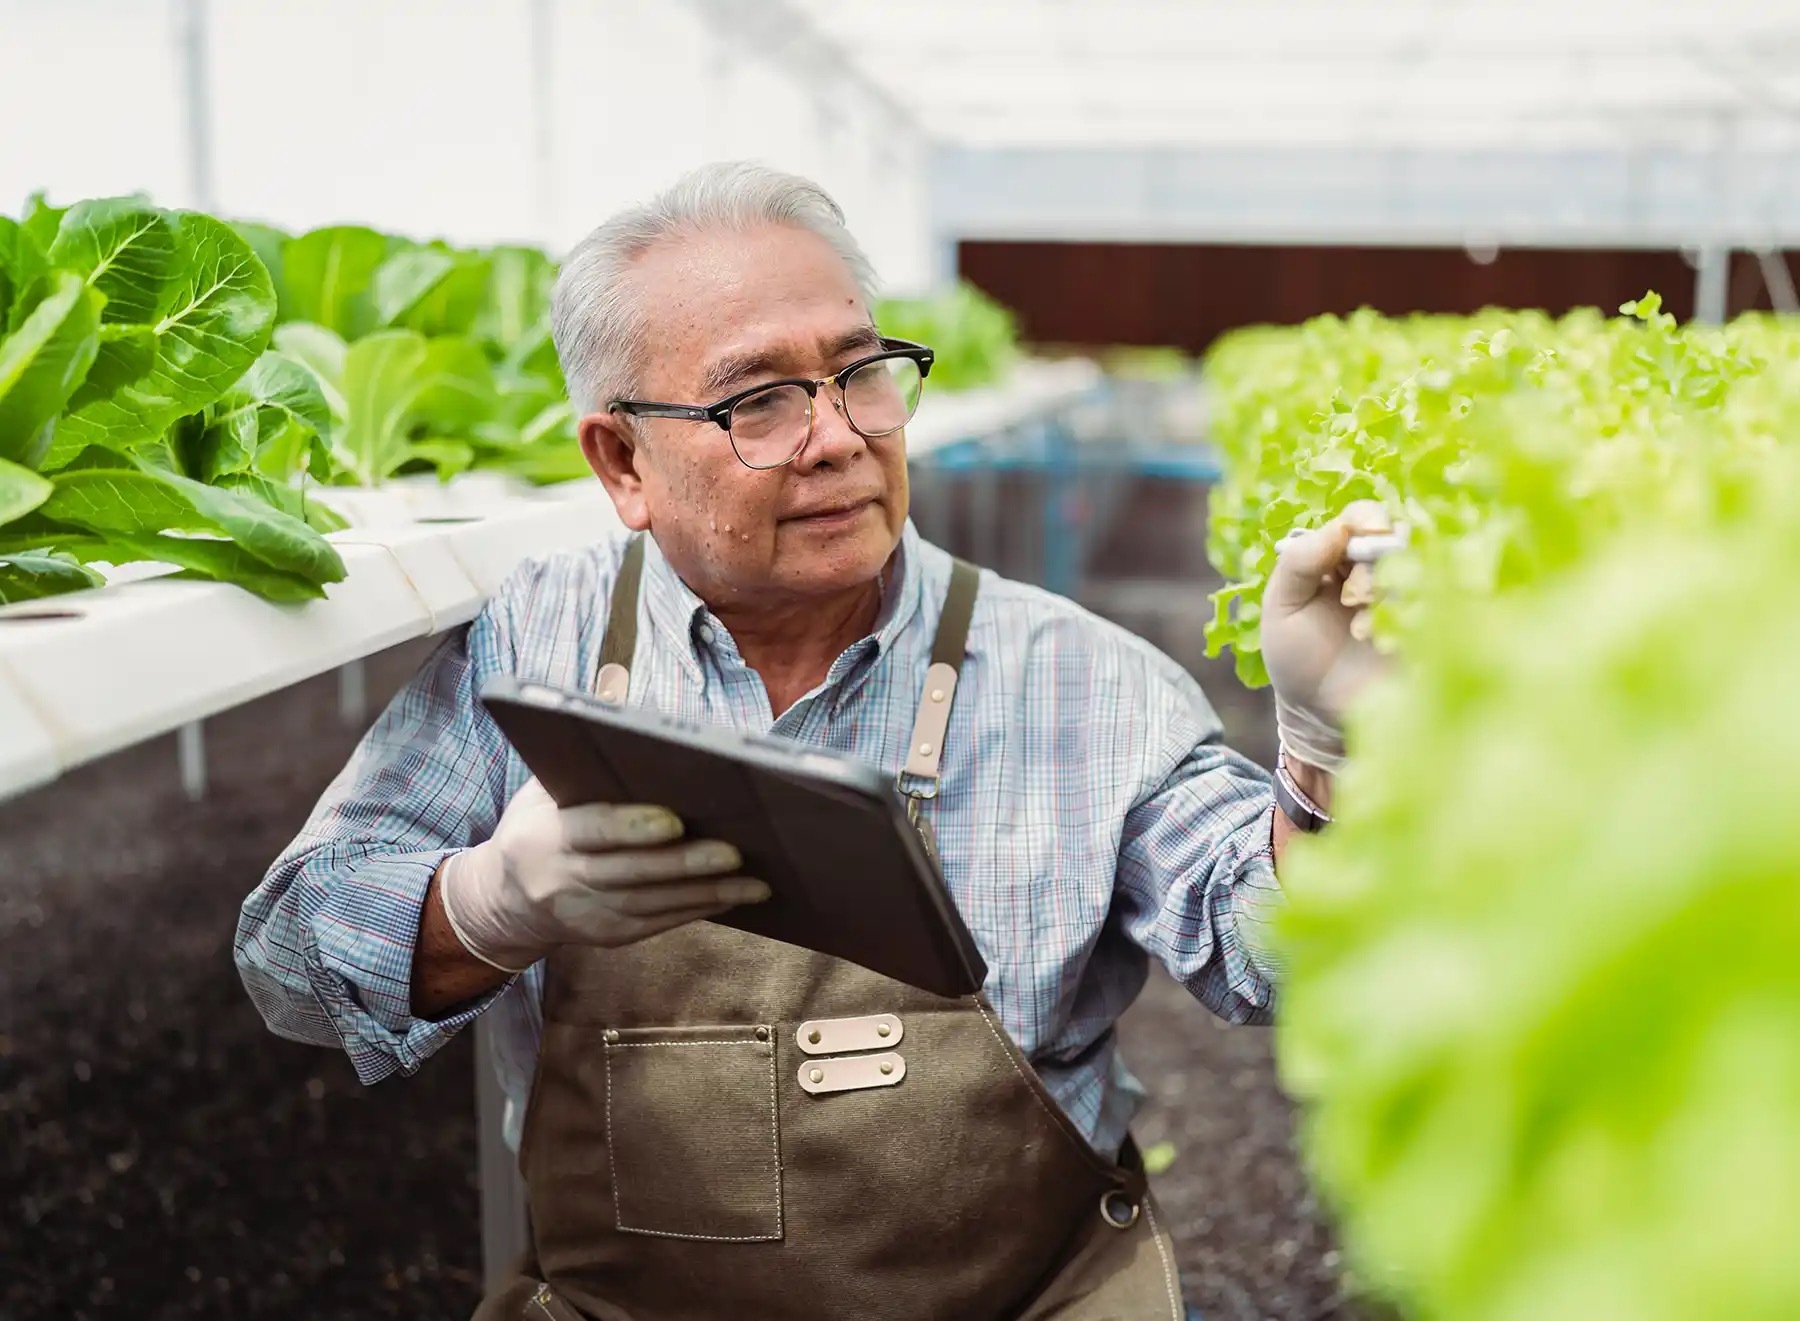 A farmer, gardener, or businessman who's close to retirement inspecting crops and plants in a greenhouse.